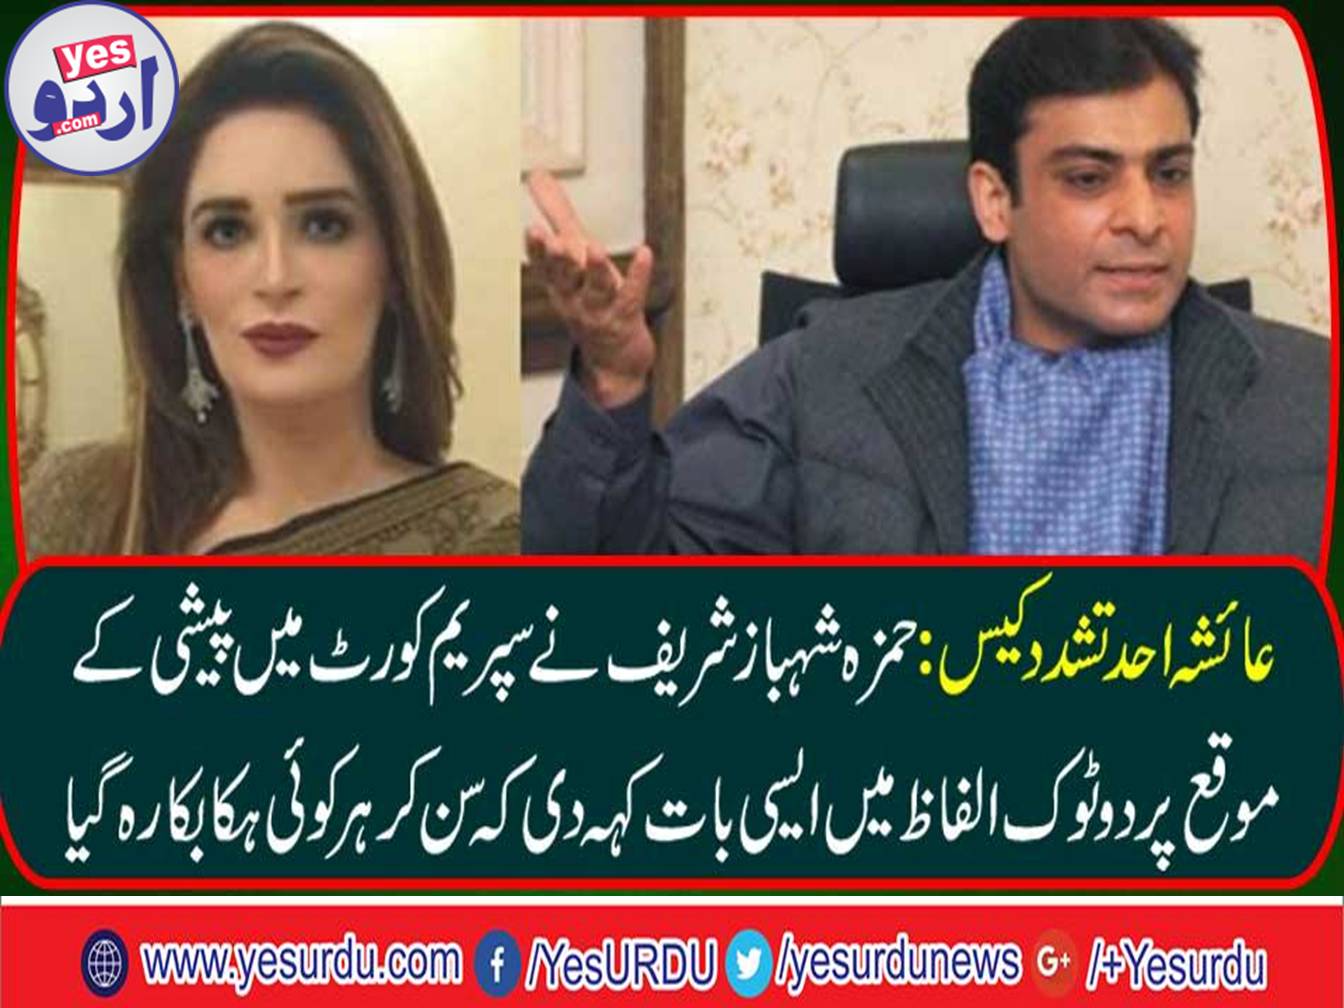 Hamza Shahbaz Sharif denied straight farward on the occasion of apprehension in the Supreme Court